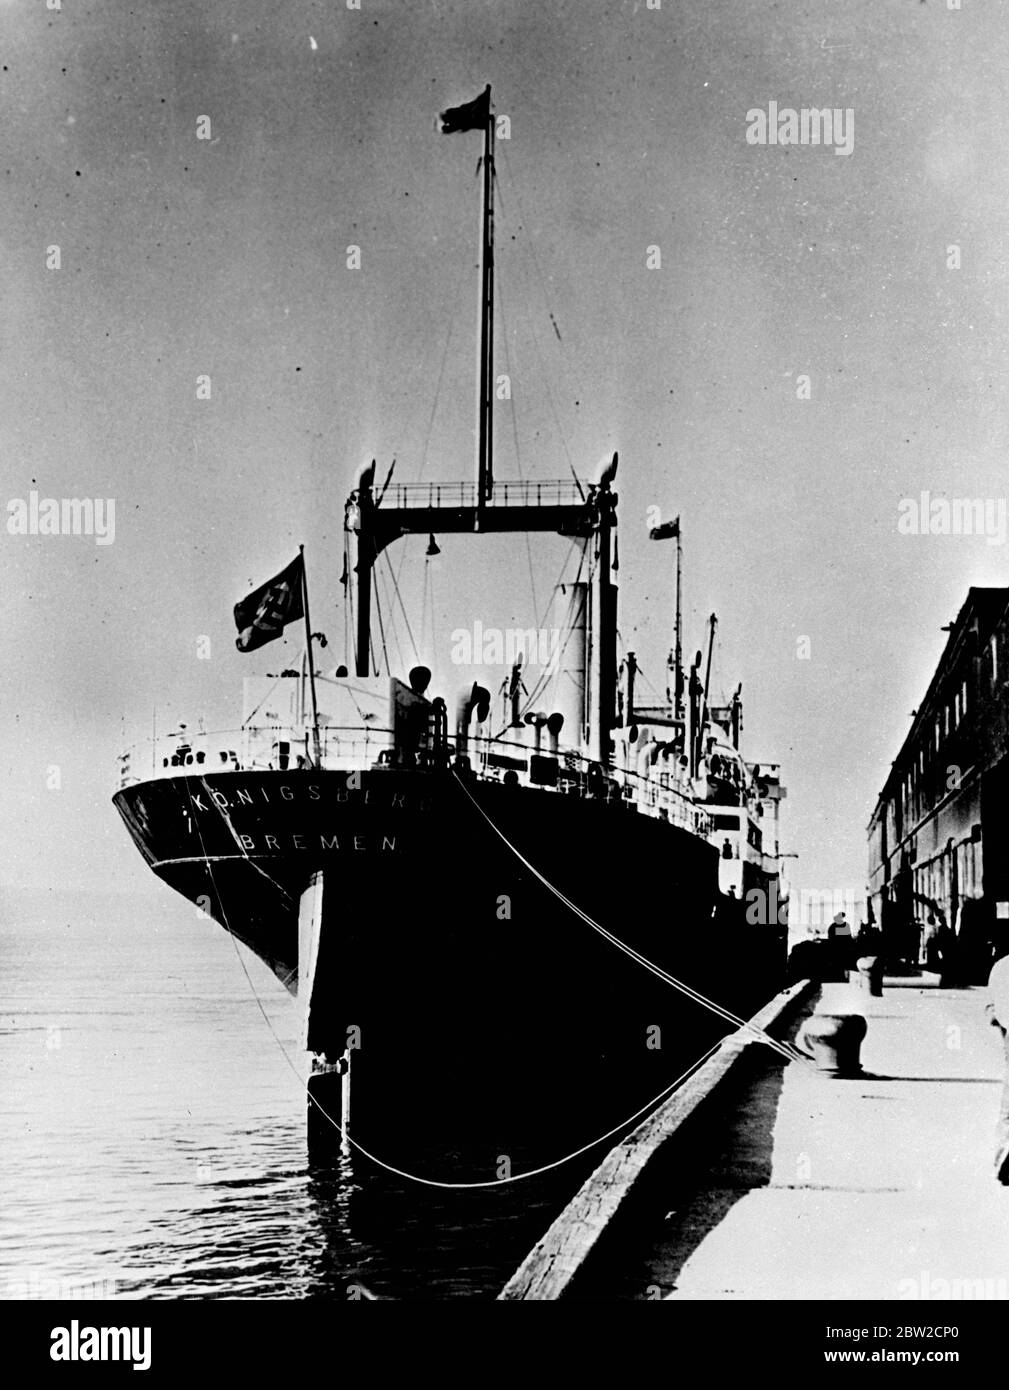 The German ship tied up at QuÃ©bec, August 26, after Canadian authorities boarded it 5 miles below QuÃ©bec and forced its master to turn back as it sailed down the Saint Lawrence. In its haste to get back to Germany in accordance with Hitler's orders, the vessel failed to unload a cargo of zinc oxide which had been paid for in advance by a Montreal firm. The Admiralty issued a theft warrant upon which the vessel was detained. 26 August 1939 Stock Photo